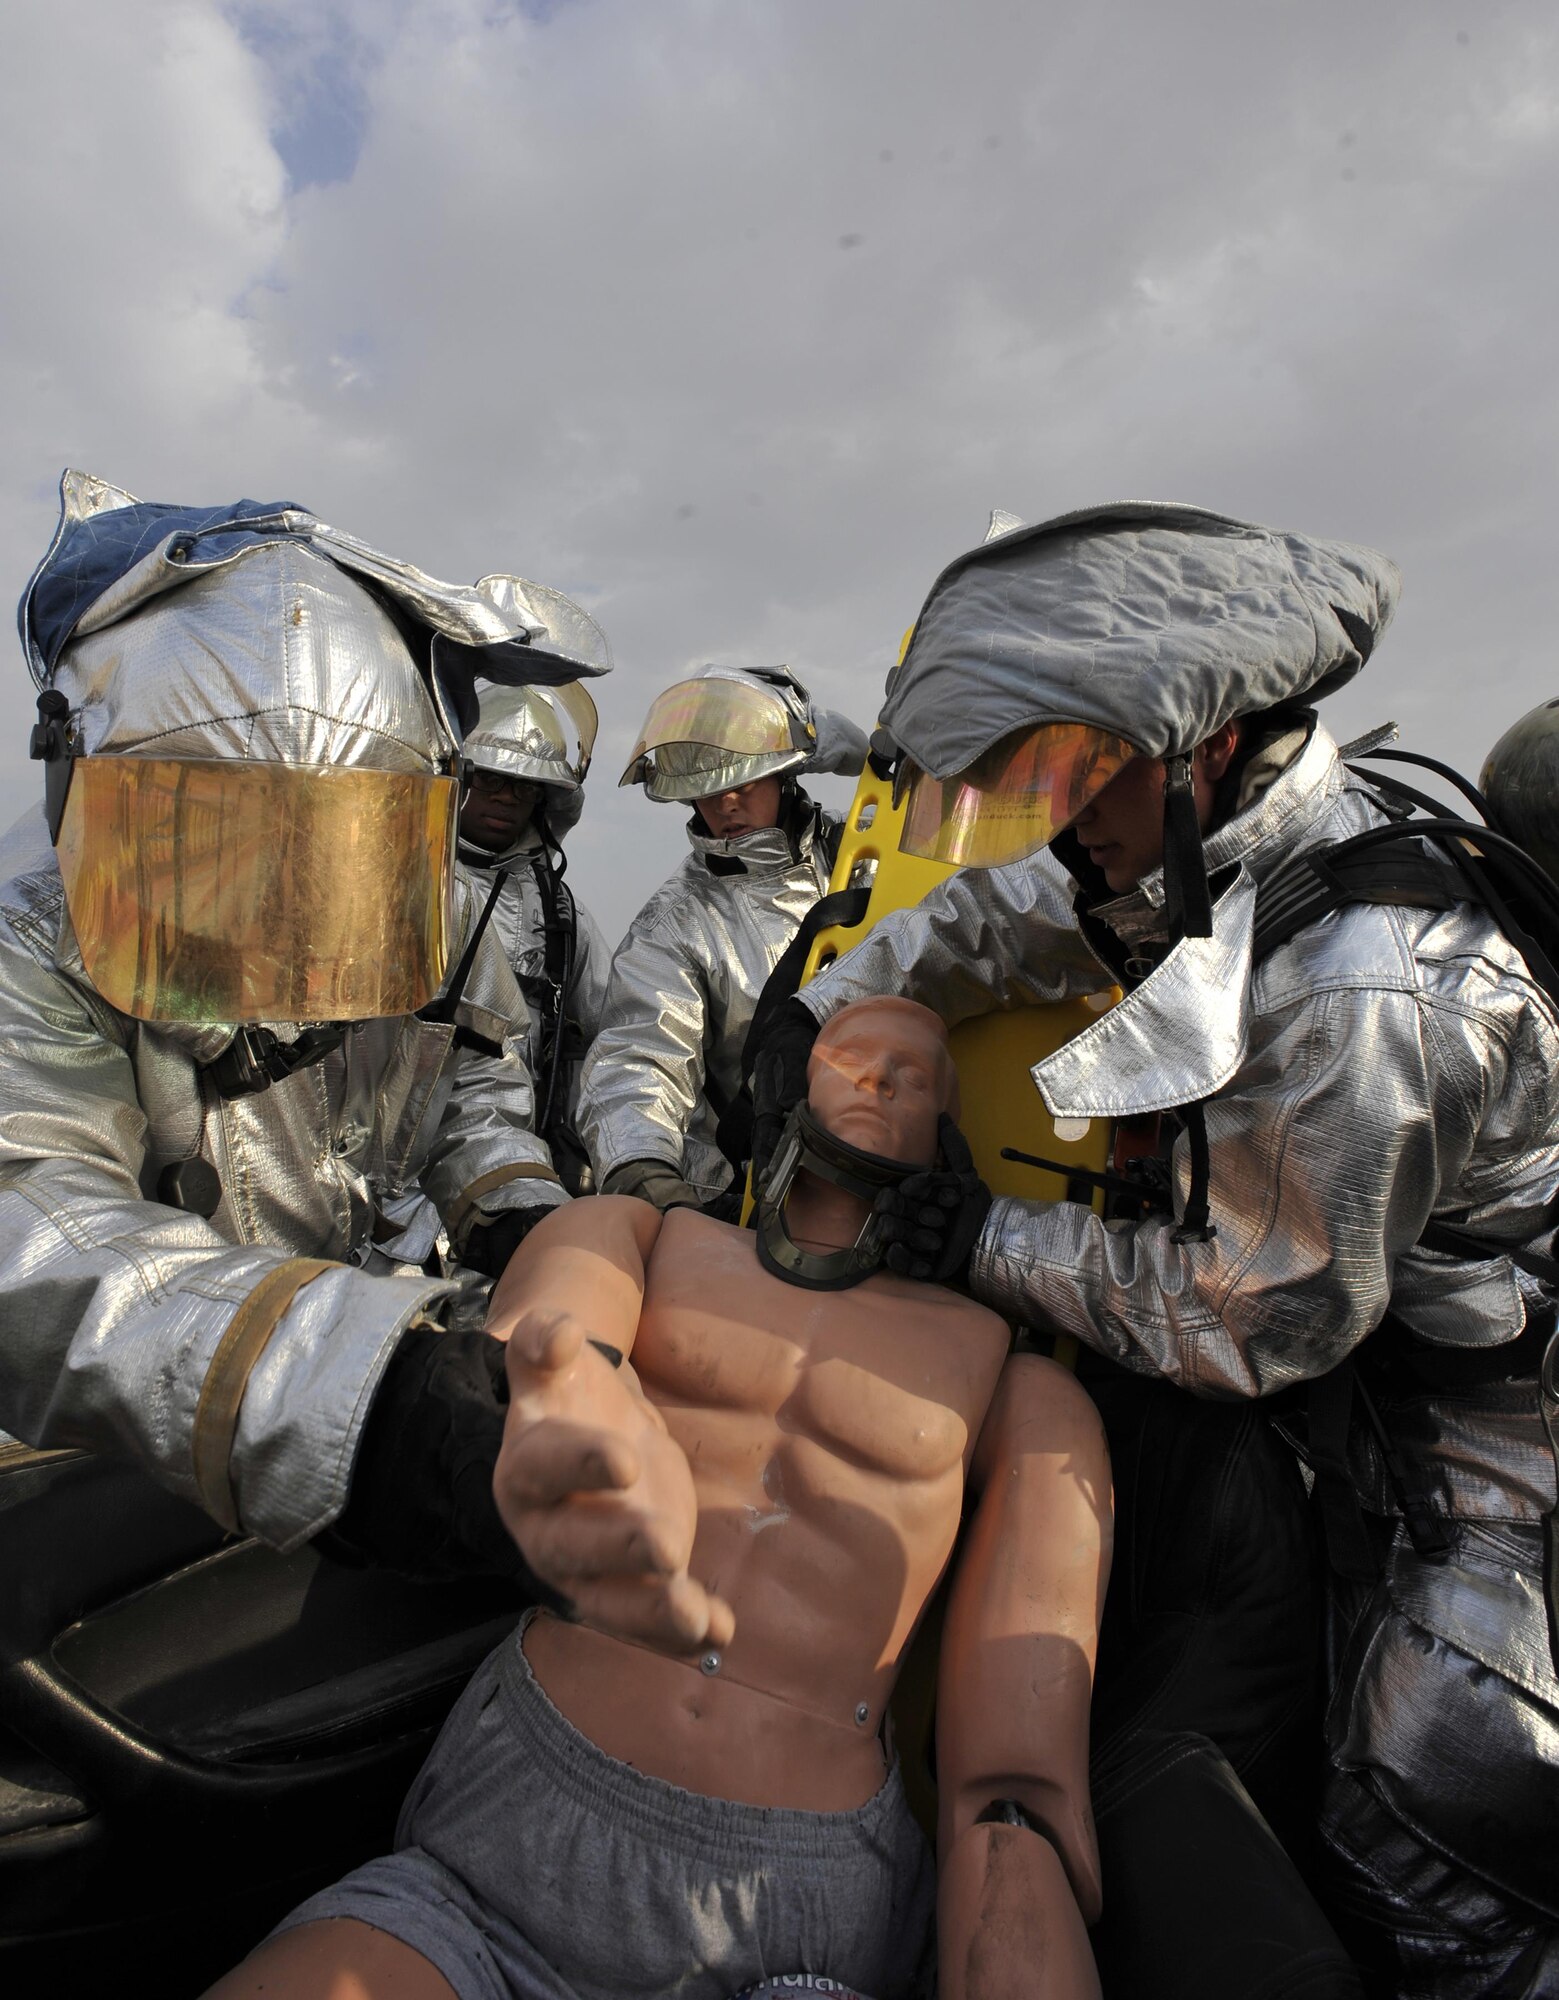 Firefighters from the 379th Air Expeditionary Civil Engineer Squadron, Al Udeid Air Base, Qatar pull a simulated patient from a vehicle during a mass casualty exercise at AUAB, Dec. 15. The exercise tested the emergency response capabilities of fire and medical personnel. (U.S. Air Force photo by Master Sgt. Joshua Strang)